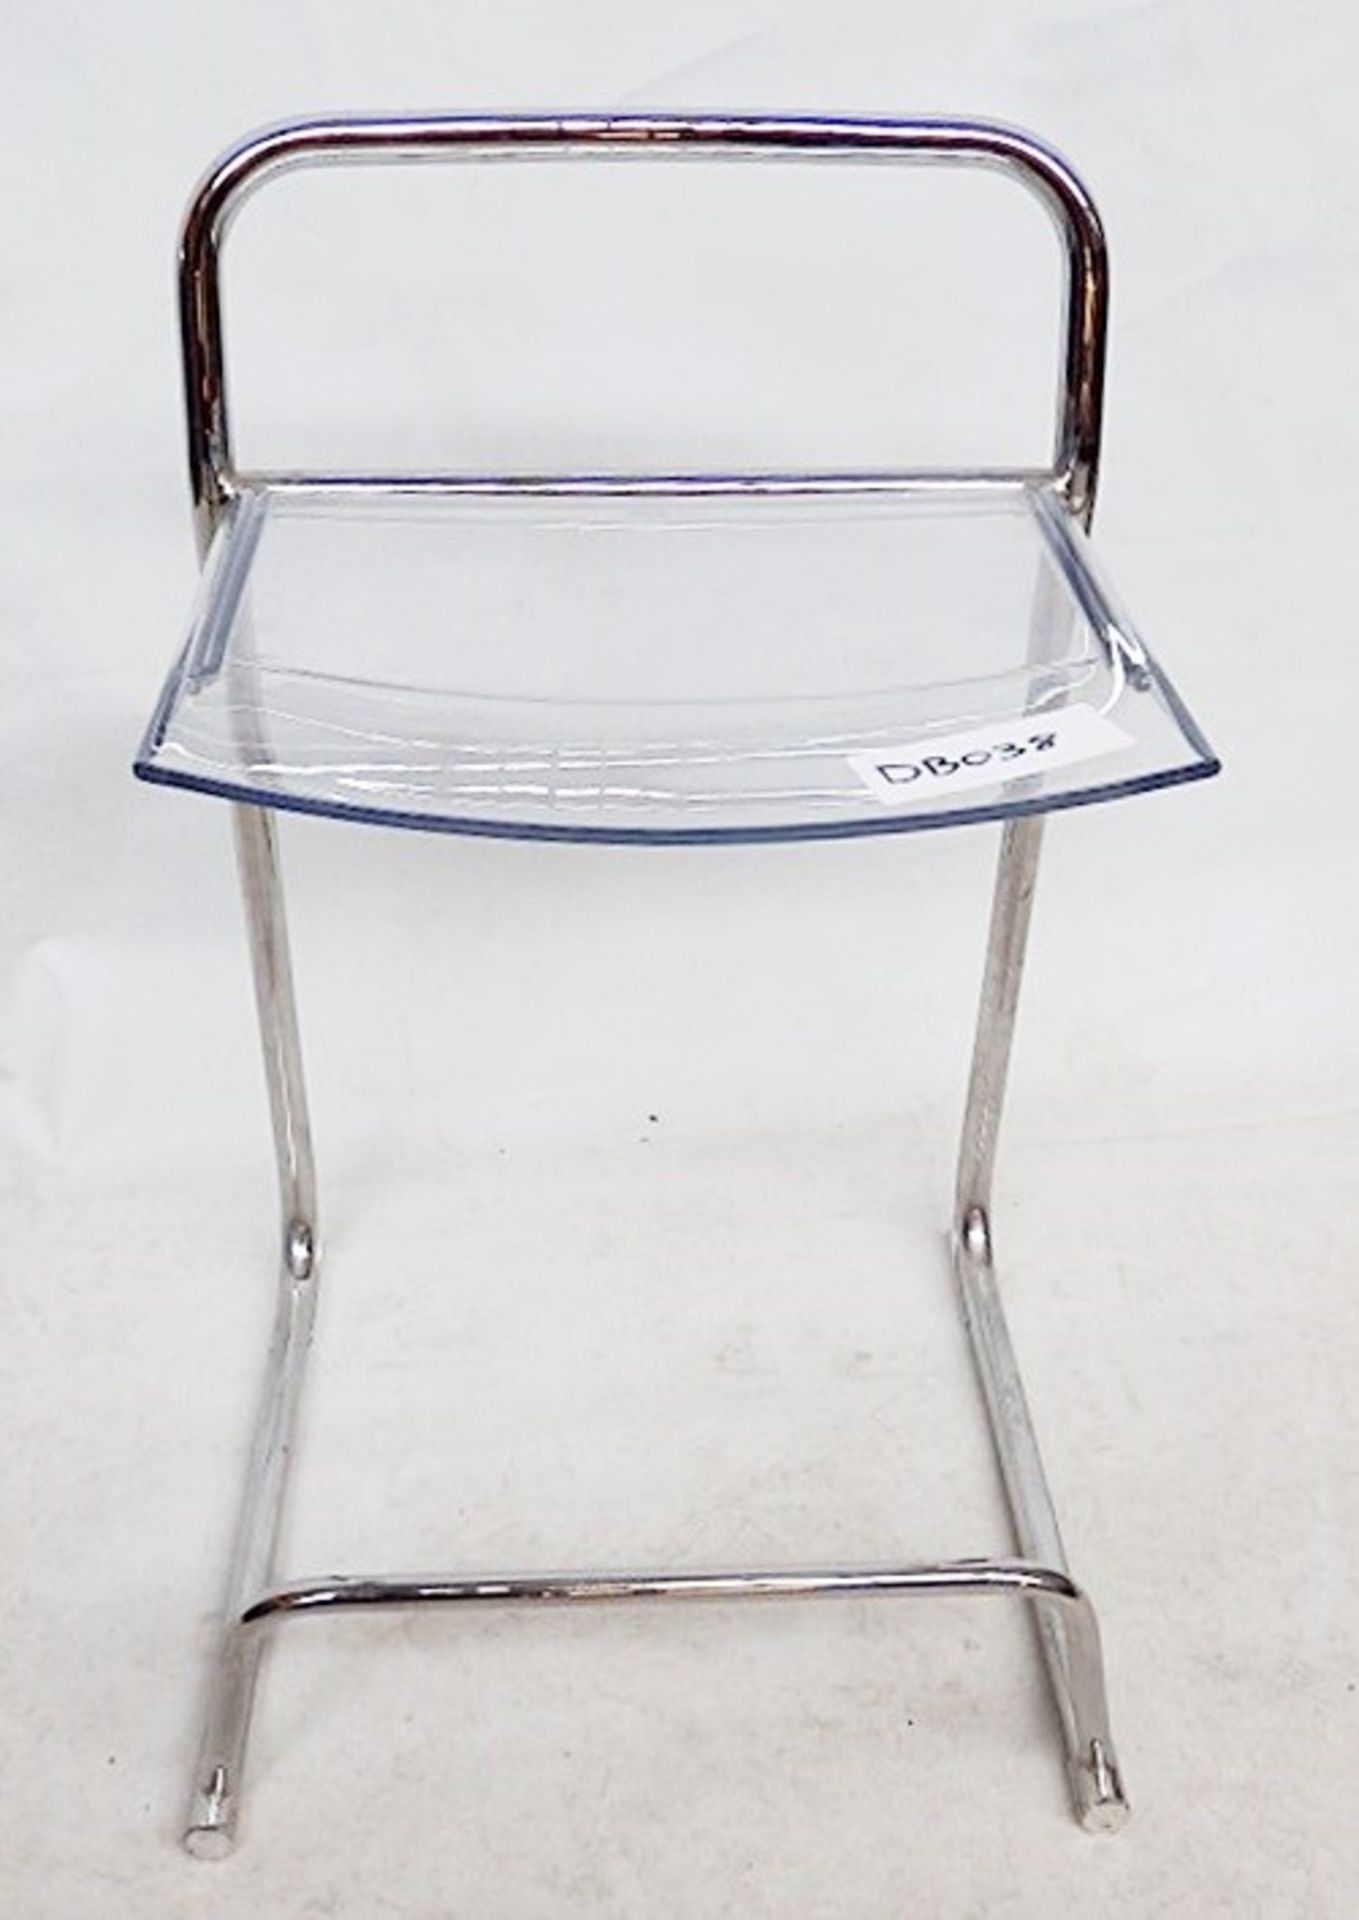 1 x Modern Designer Chair - Features A Sturdy Metal Tube Frame and Clear Perspex Seat - - Image 3 of 3